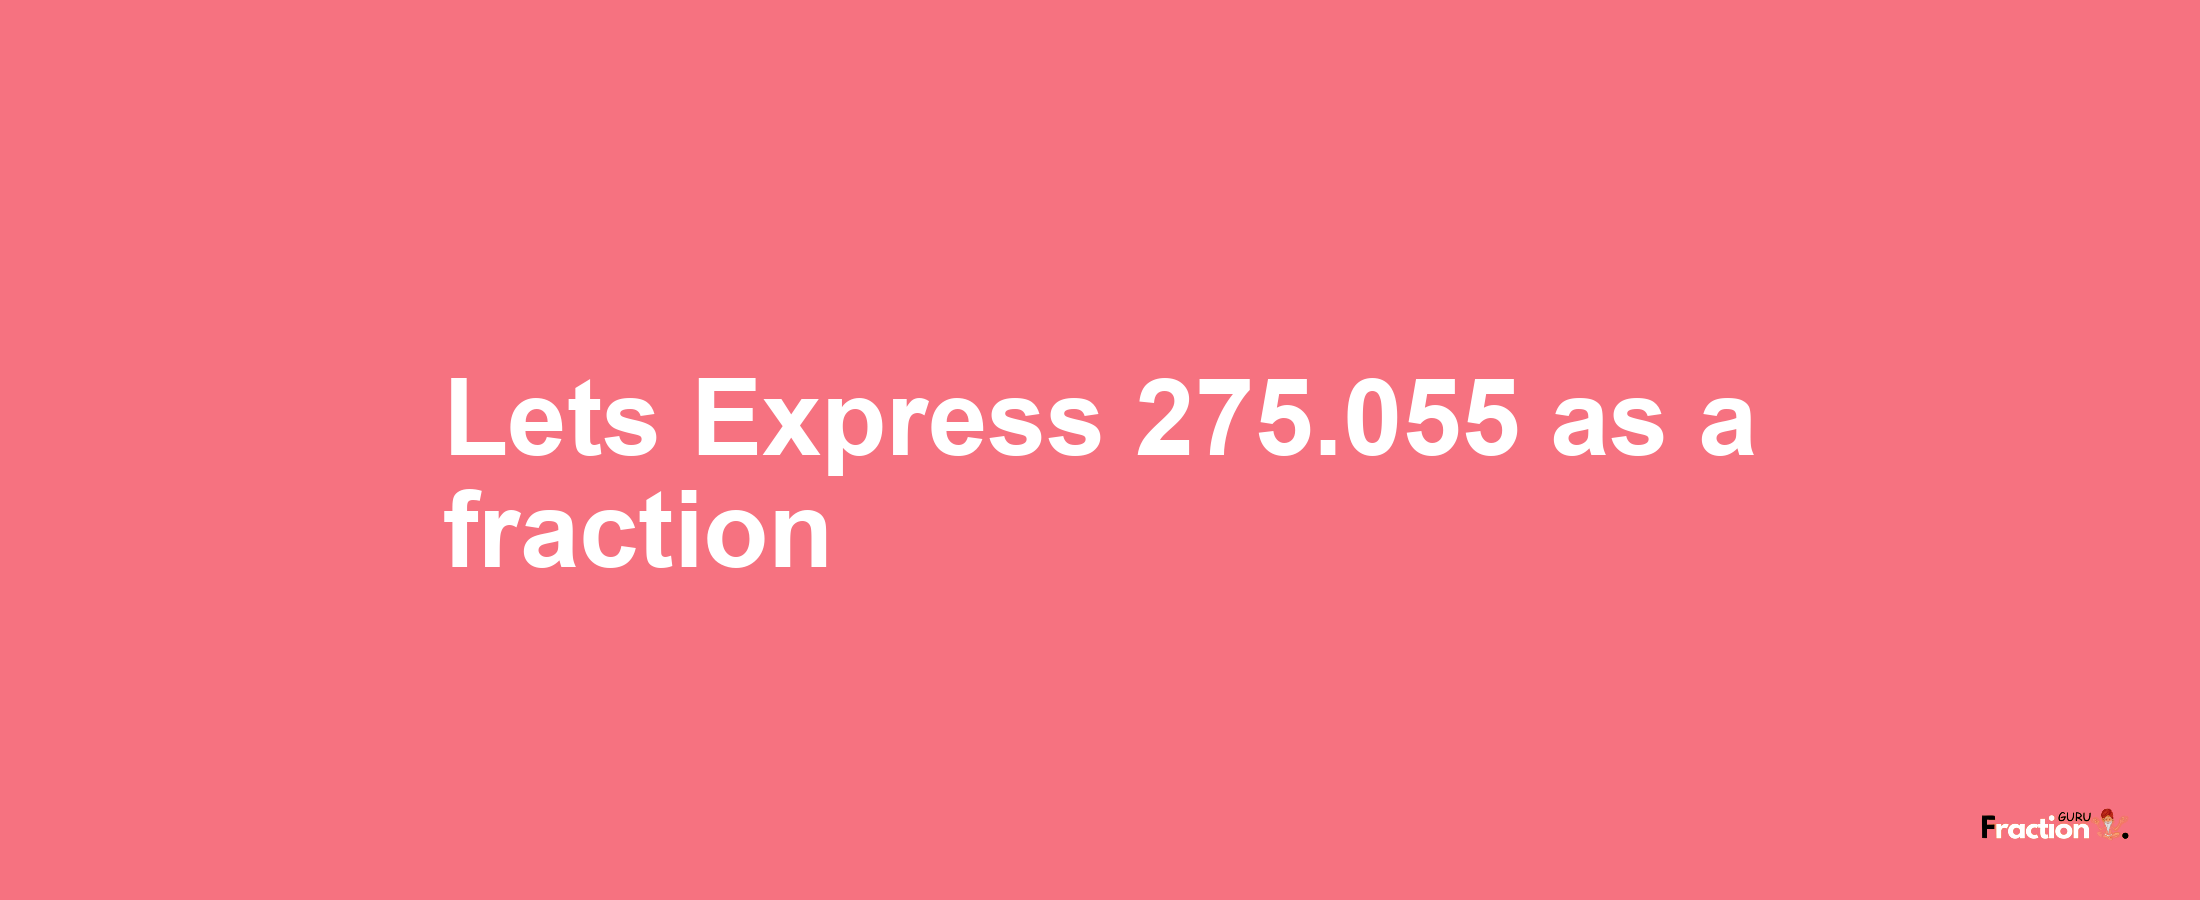 Lets Express 275.055 as afraction